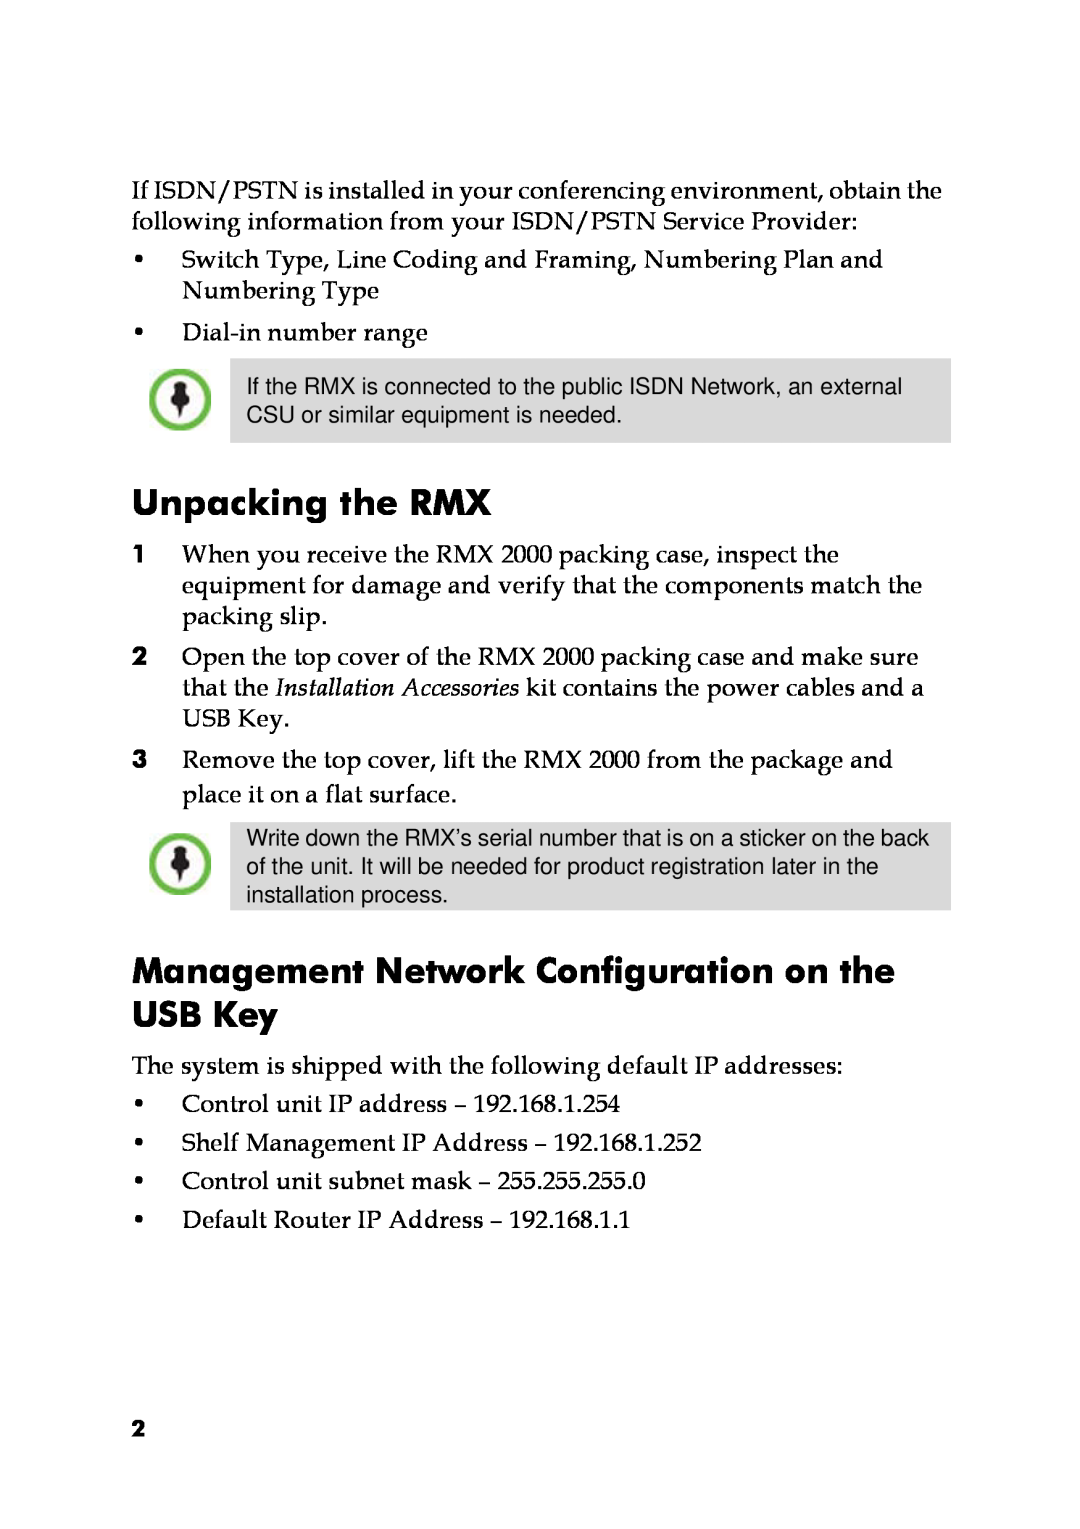 Polycom DOC2563A manual Unpacking the RMX, Management Network Configuration on the USB Key 